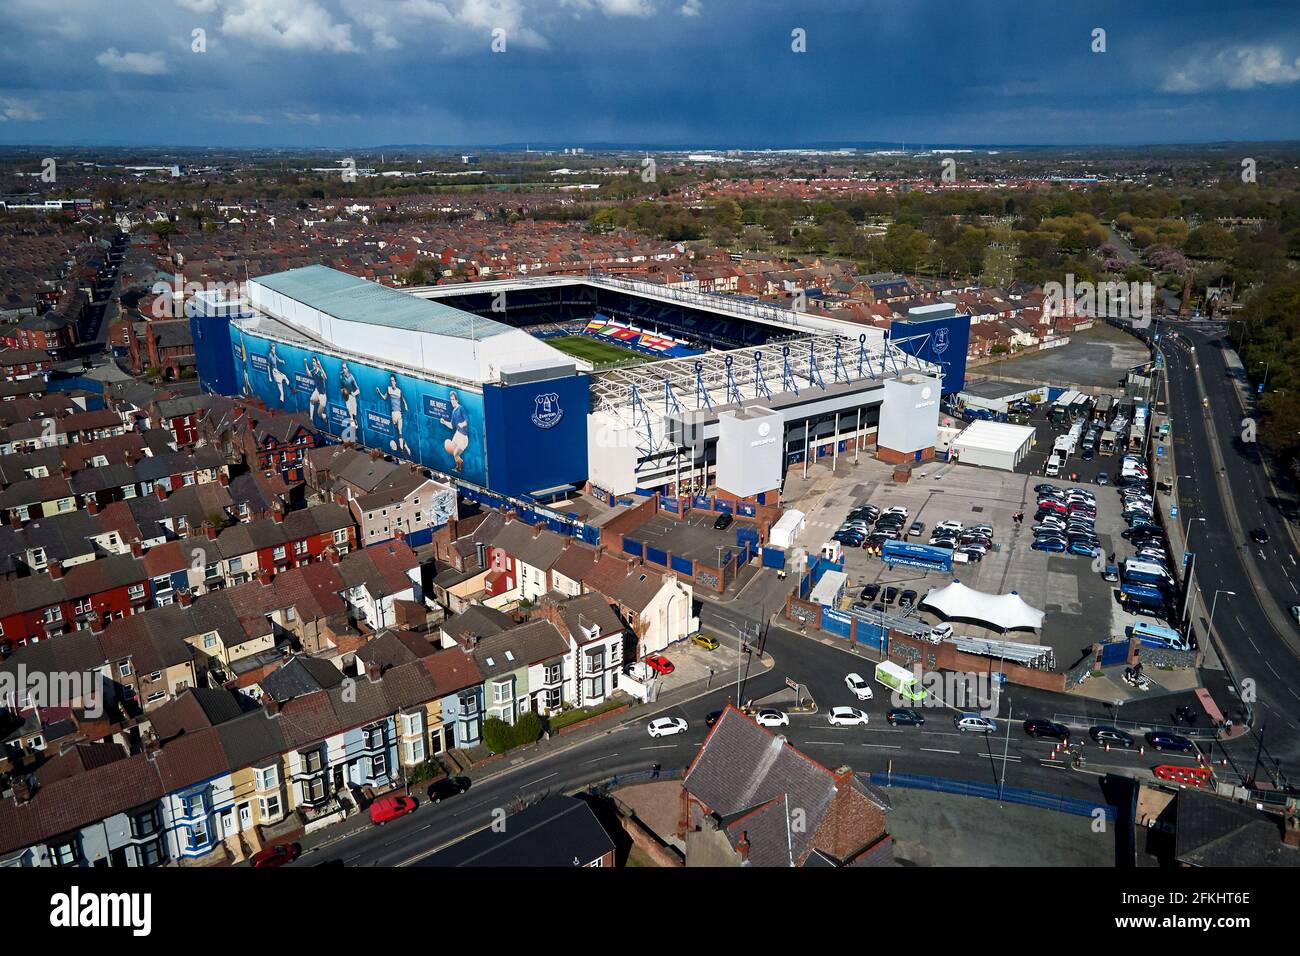 Aerial view of Goodison Park showing the stadium in it’s urban setting surrounded by residential houses Stock Photo